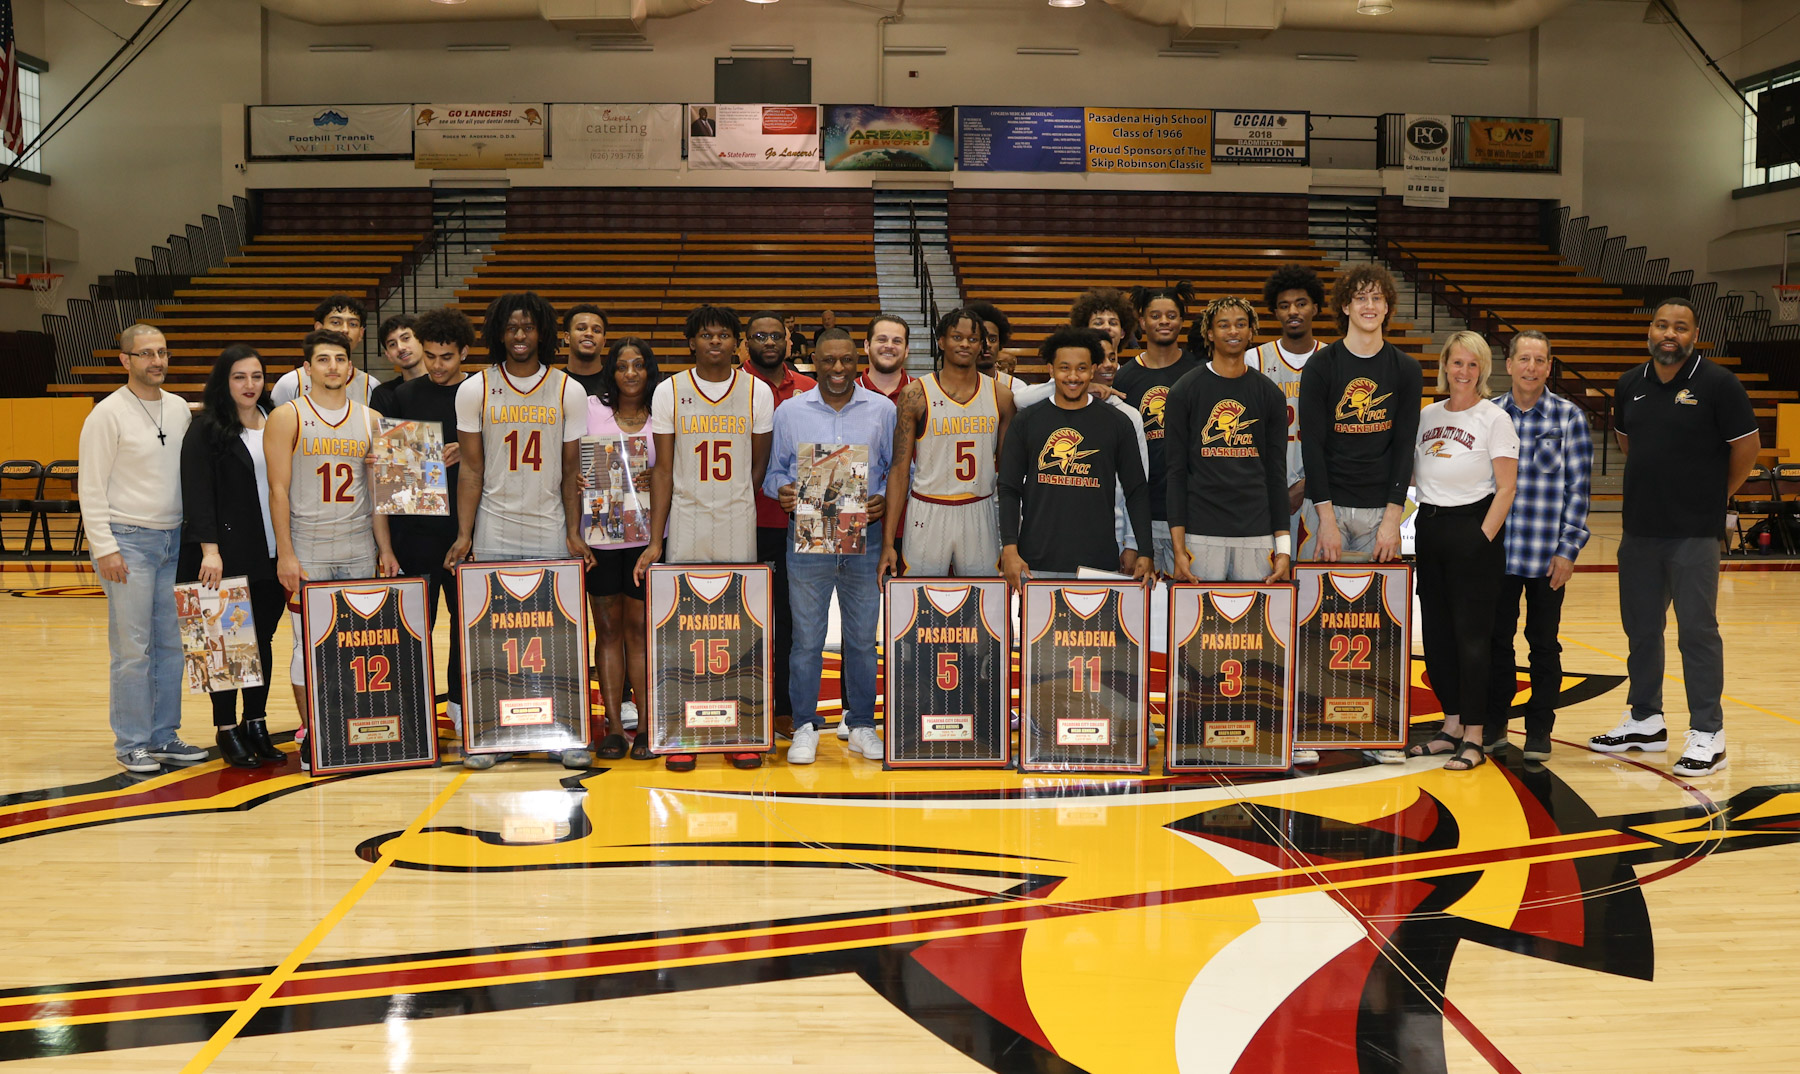 The Lancers celebrated their seven sophomores on Friday night (photo by Richard Quinton).